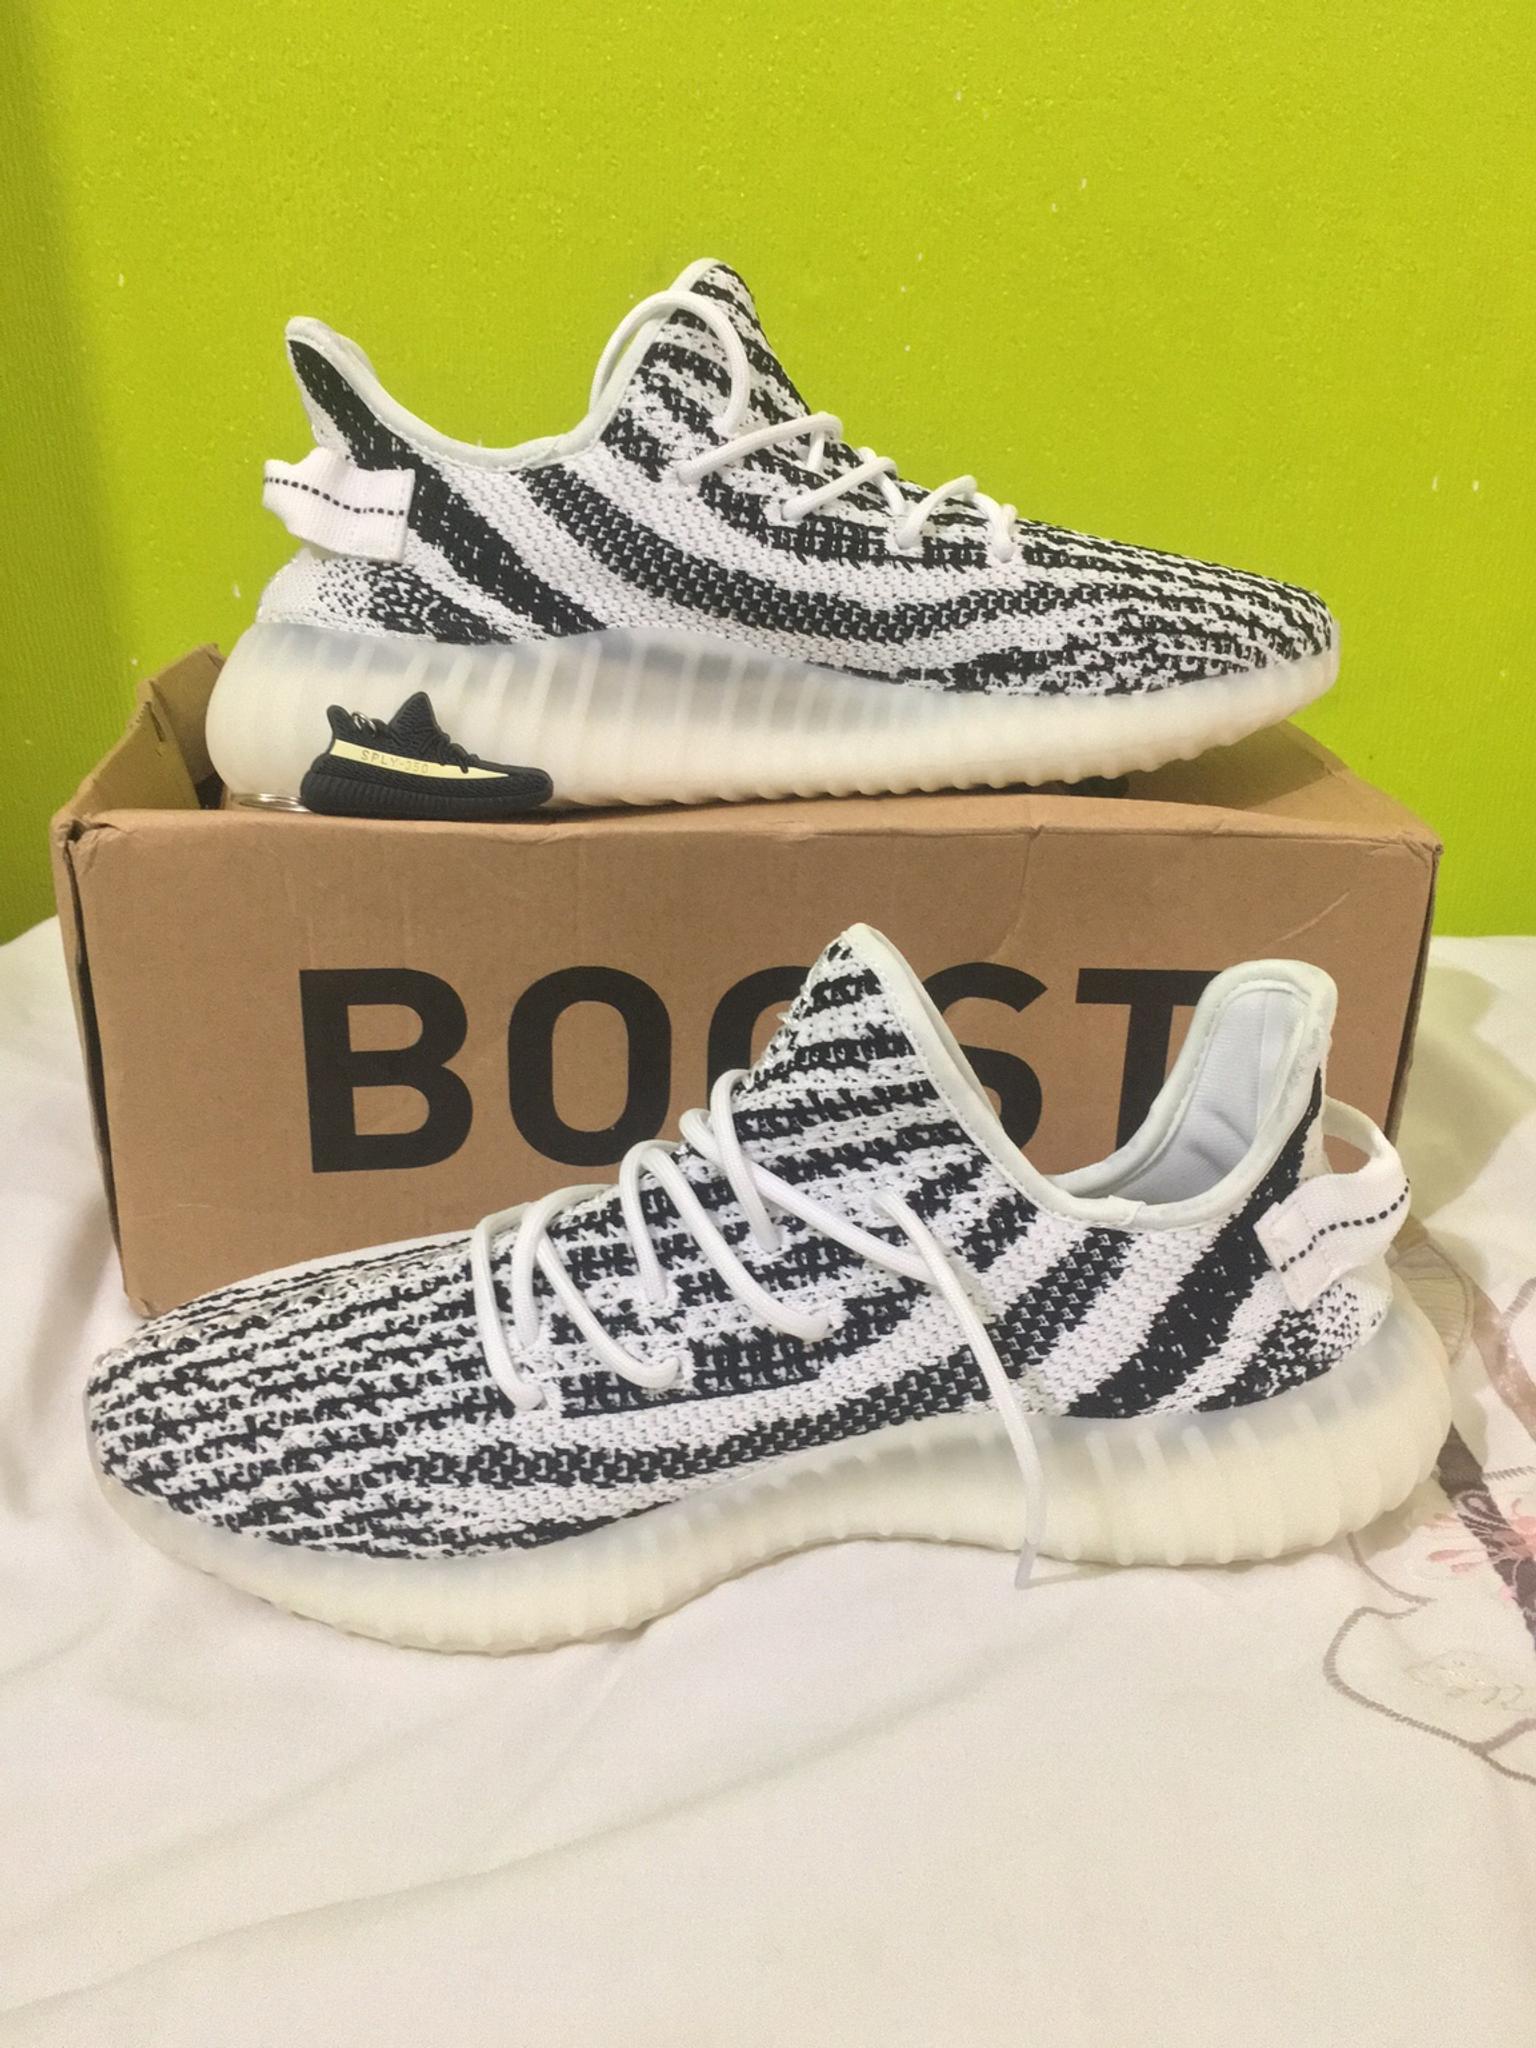 Cheap Authentic Yeezy Boost 350 V2 Carbon Sneakers Fz5000 Various Sizes